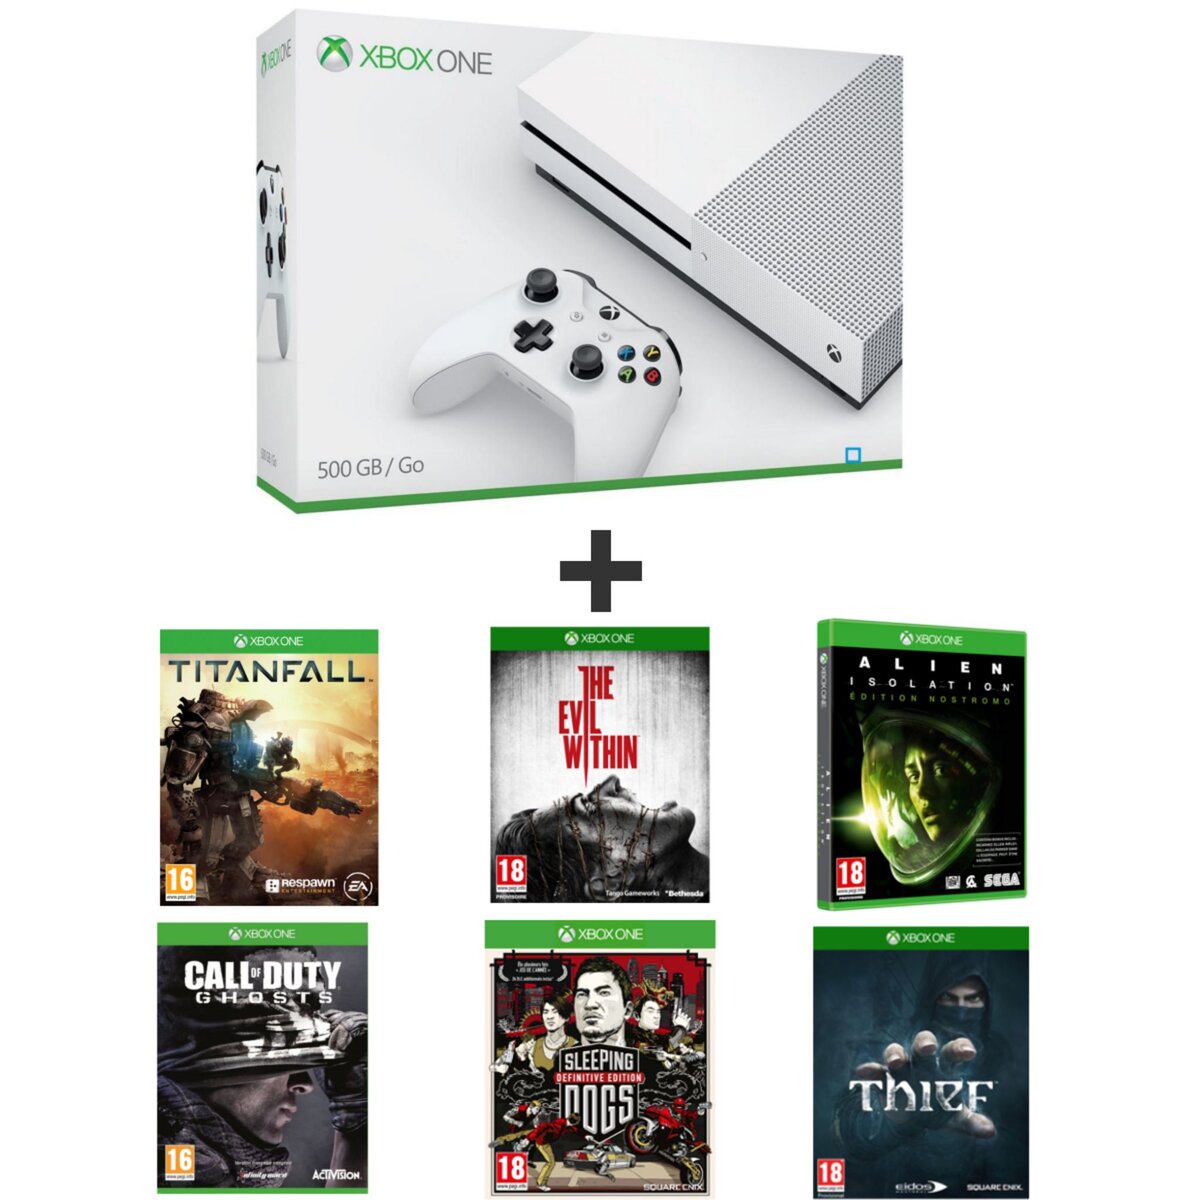 Console Xbox One S 500 Go + TITANFALL + THE EVIL WITHIN + ALIEN ISOLATION - LIMITED EDITION + CALL OF DUTY GHOSTS + SLEEPING DOGS + THIEF